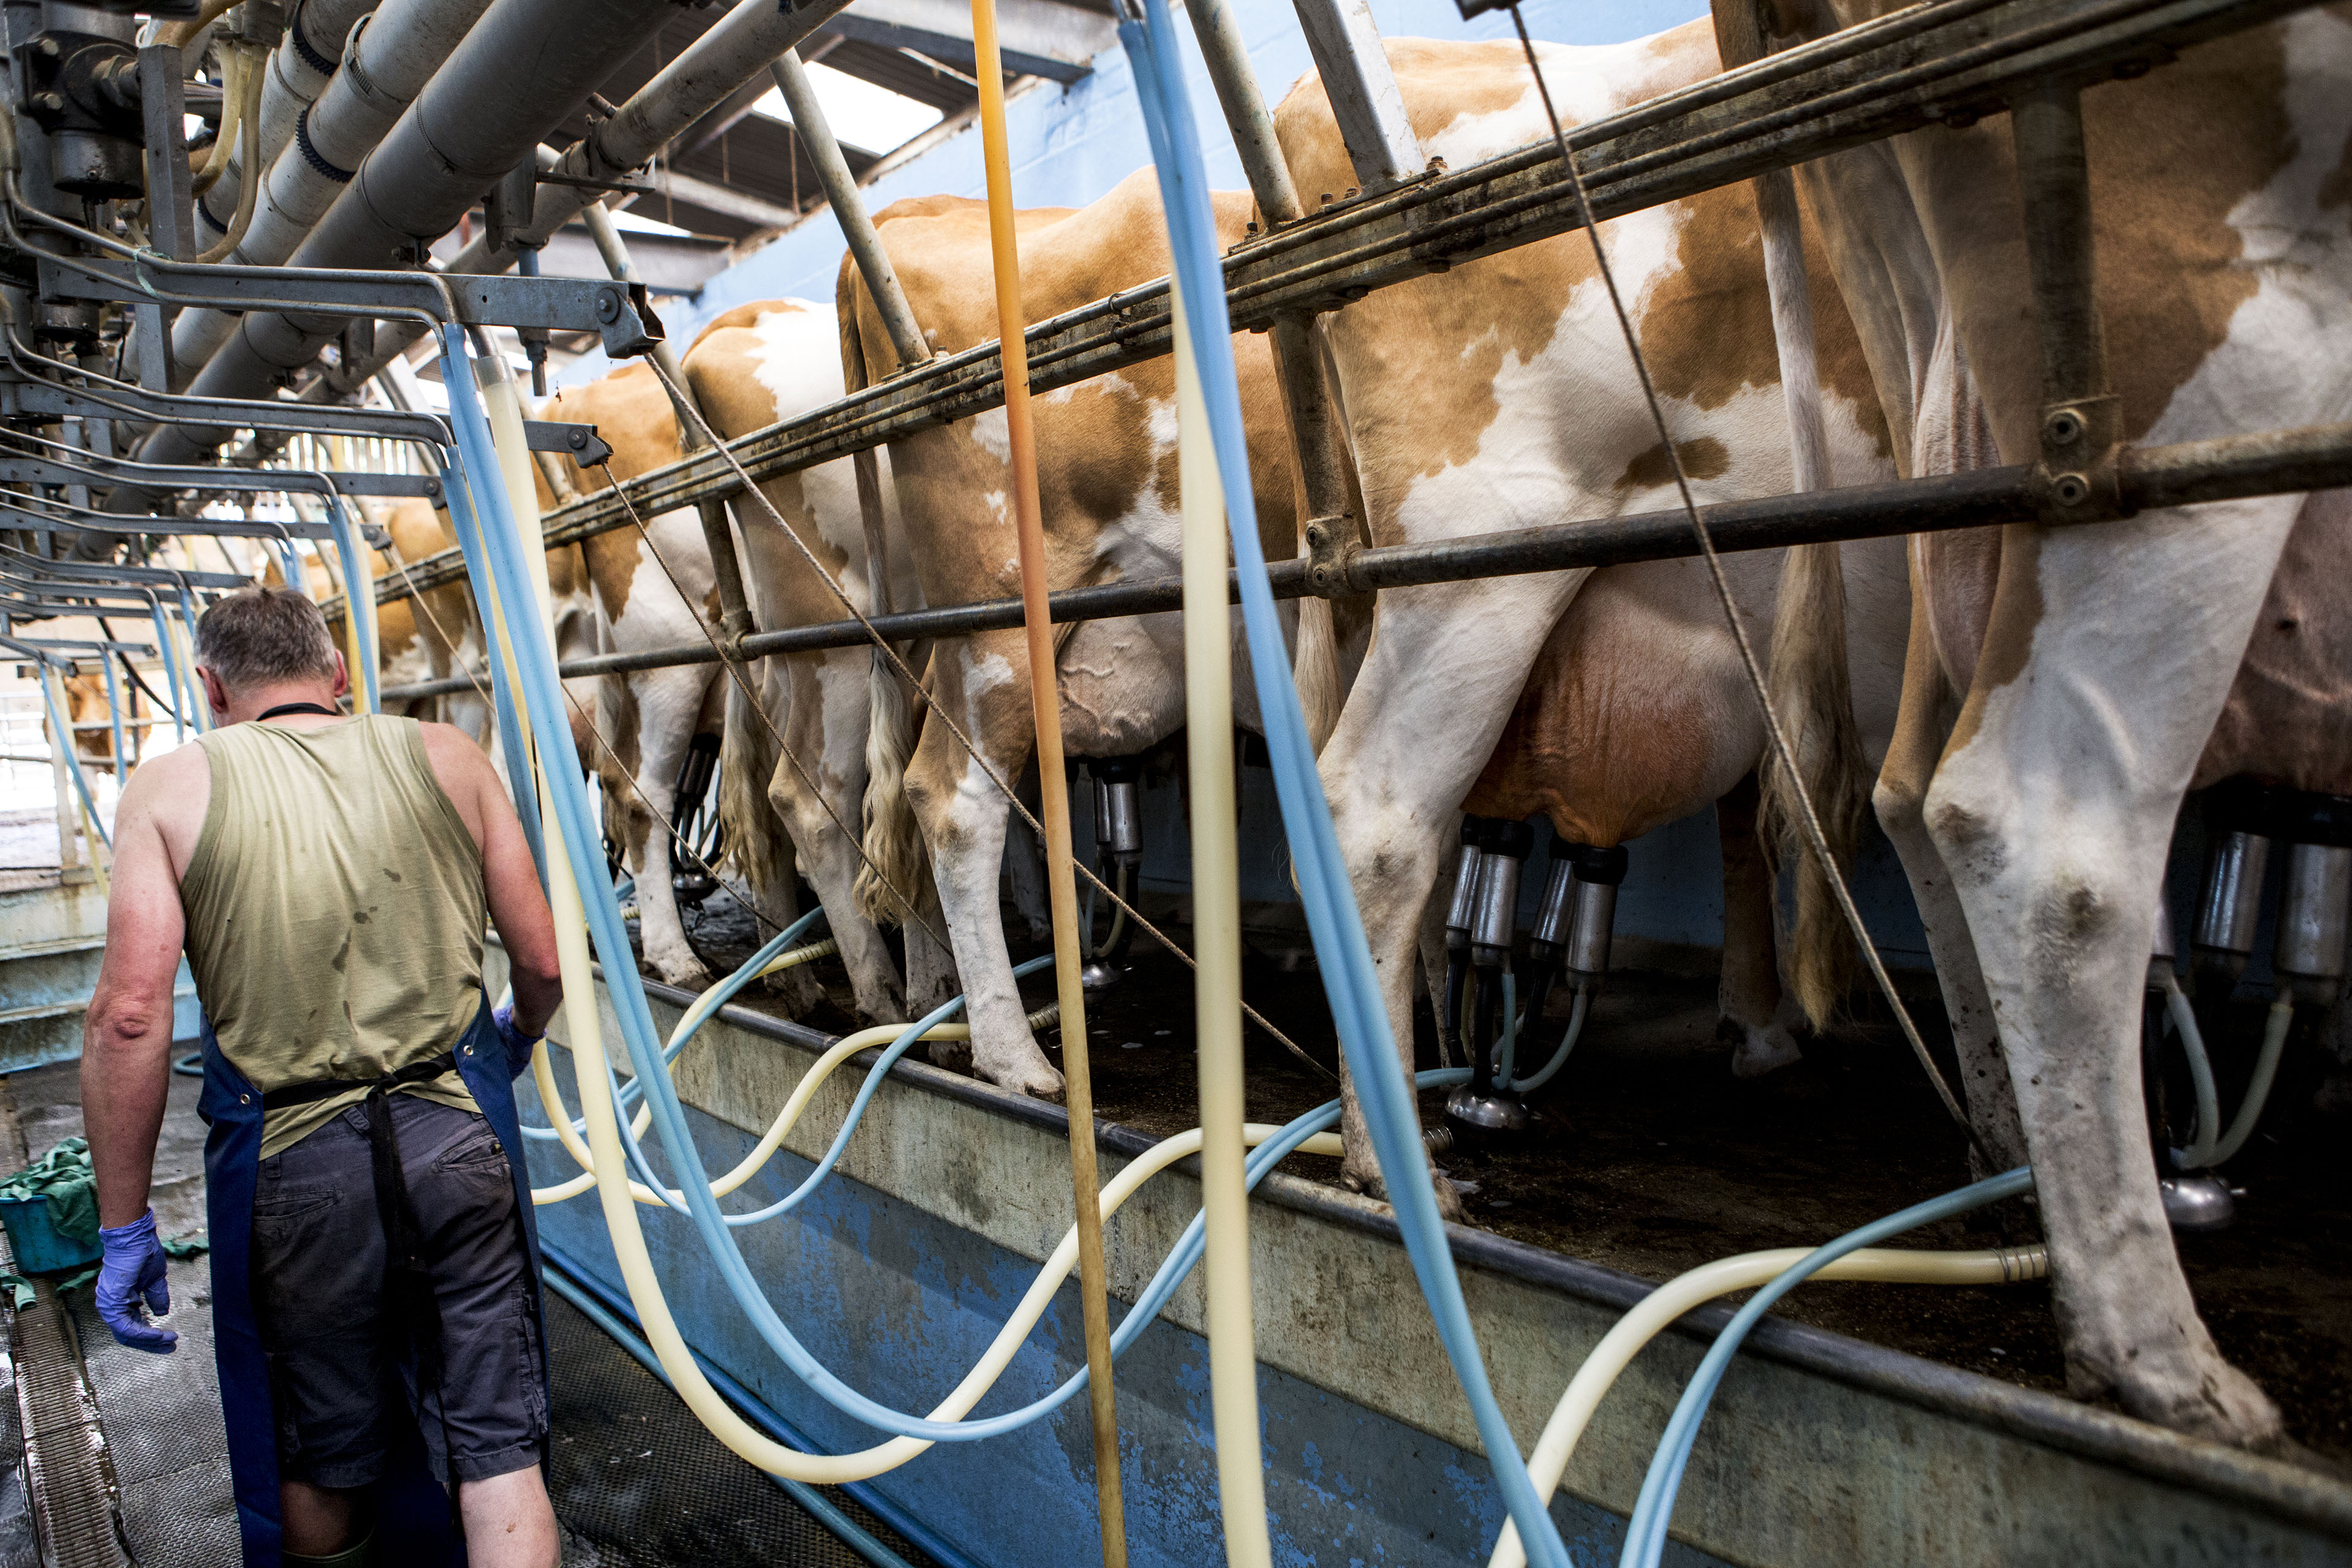 A man wearing apron standing in a cow milking shed walks away from the camera. To his right are rows of cows hooked up to milking machines.